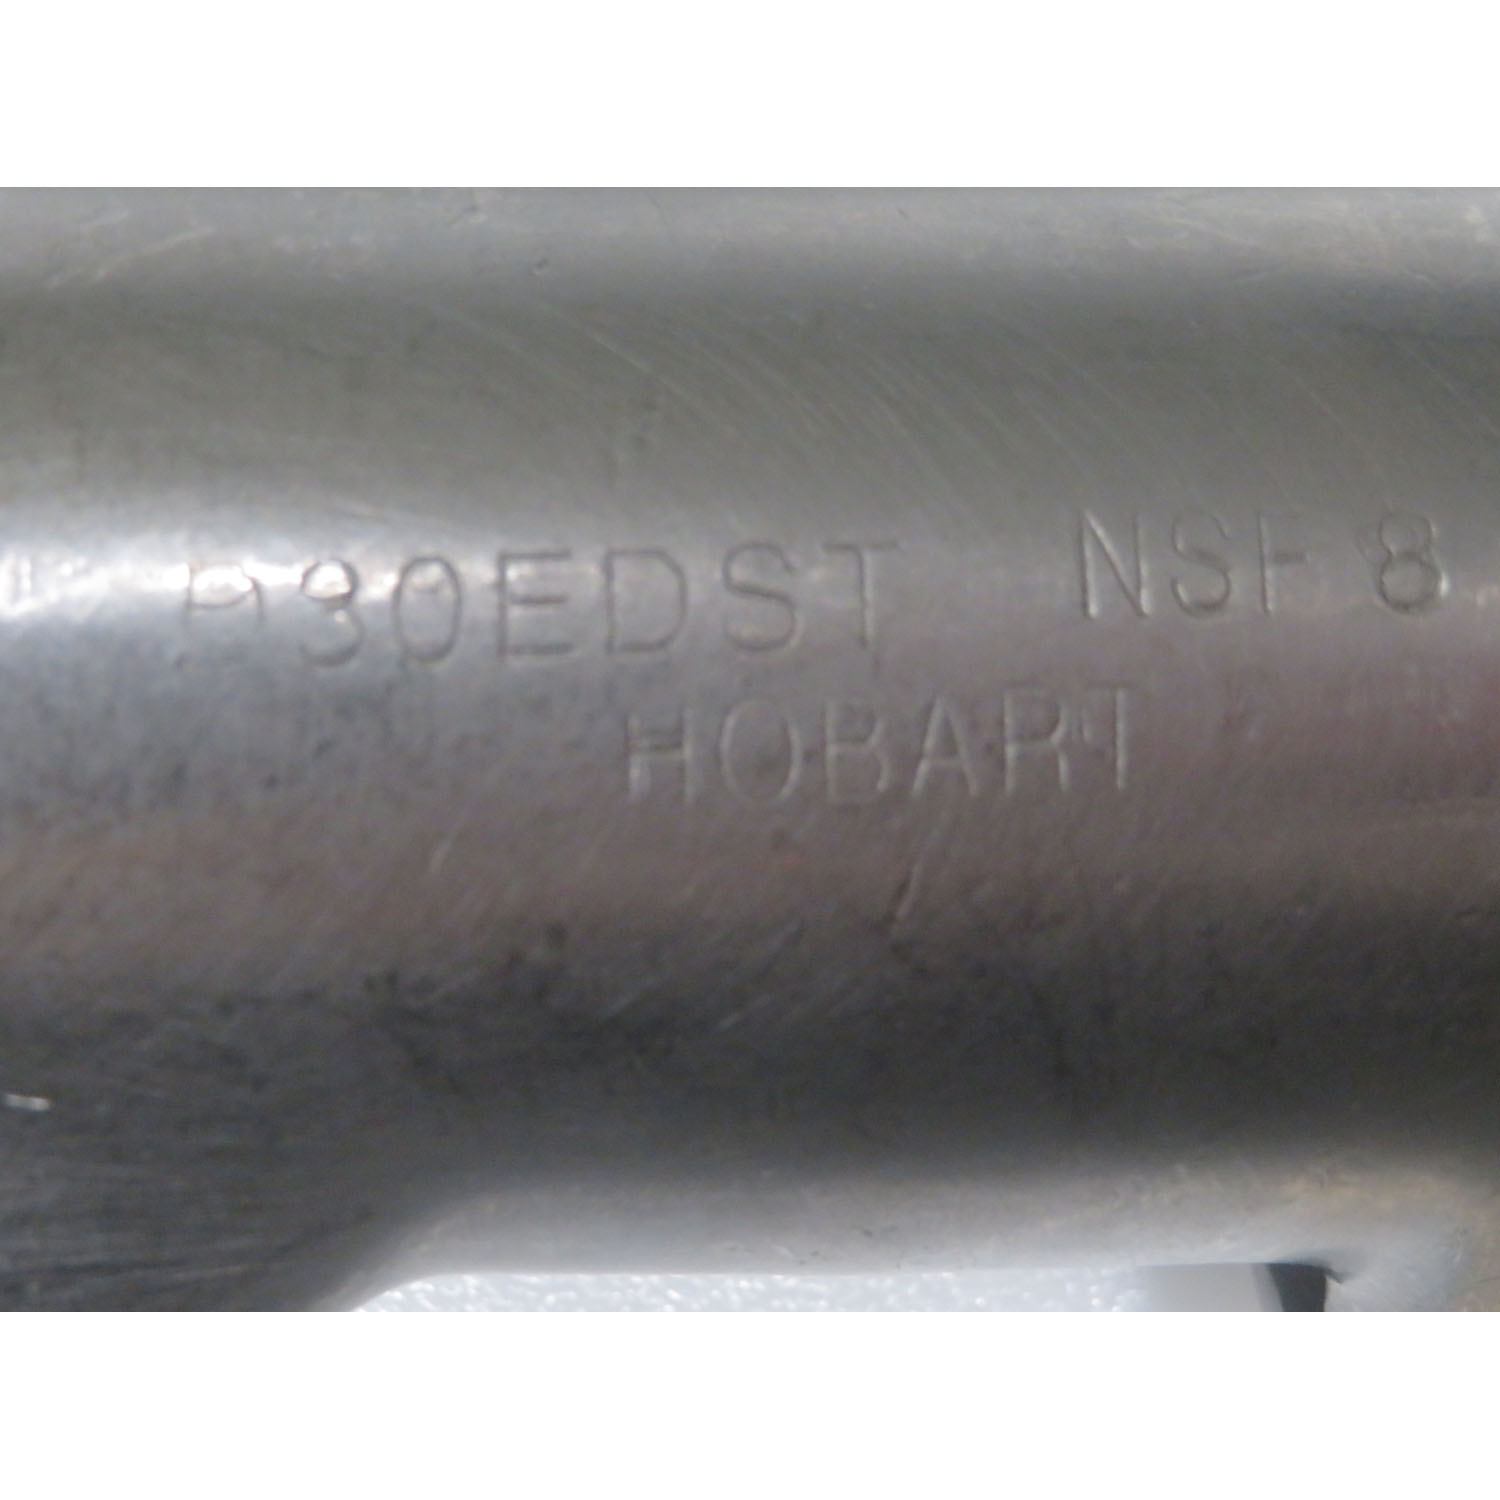 Hobart D30EDST 30 Quart Hook Stainless Steel, Used Excellent Condition image 2